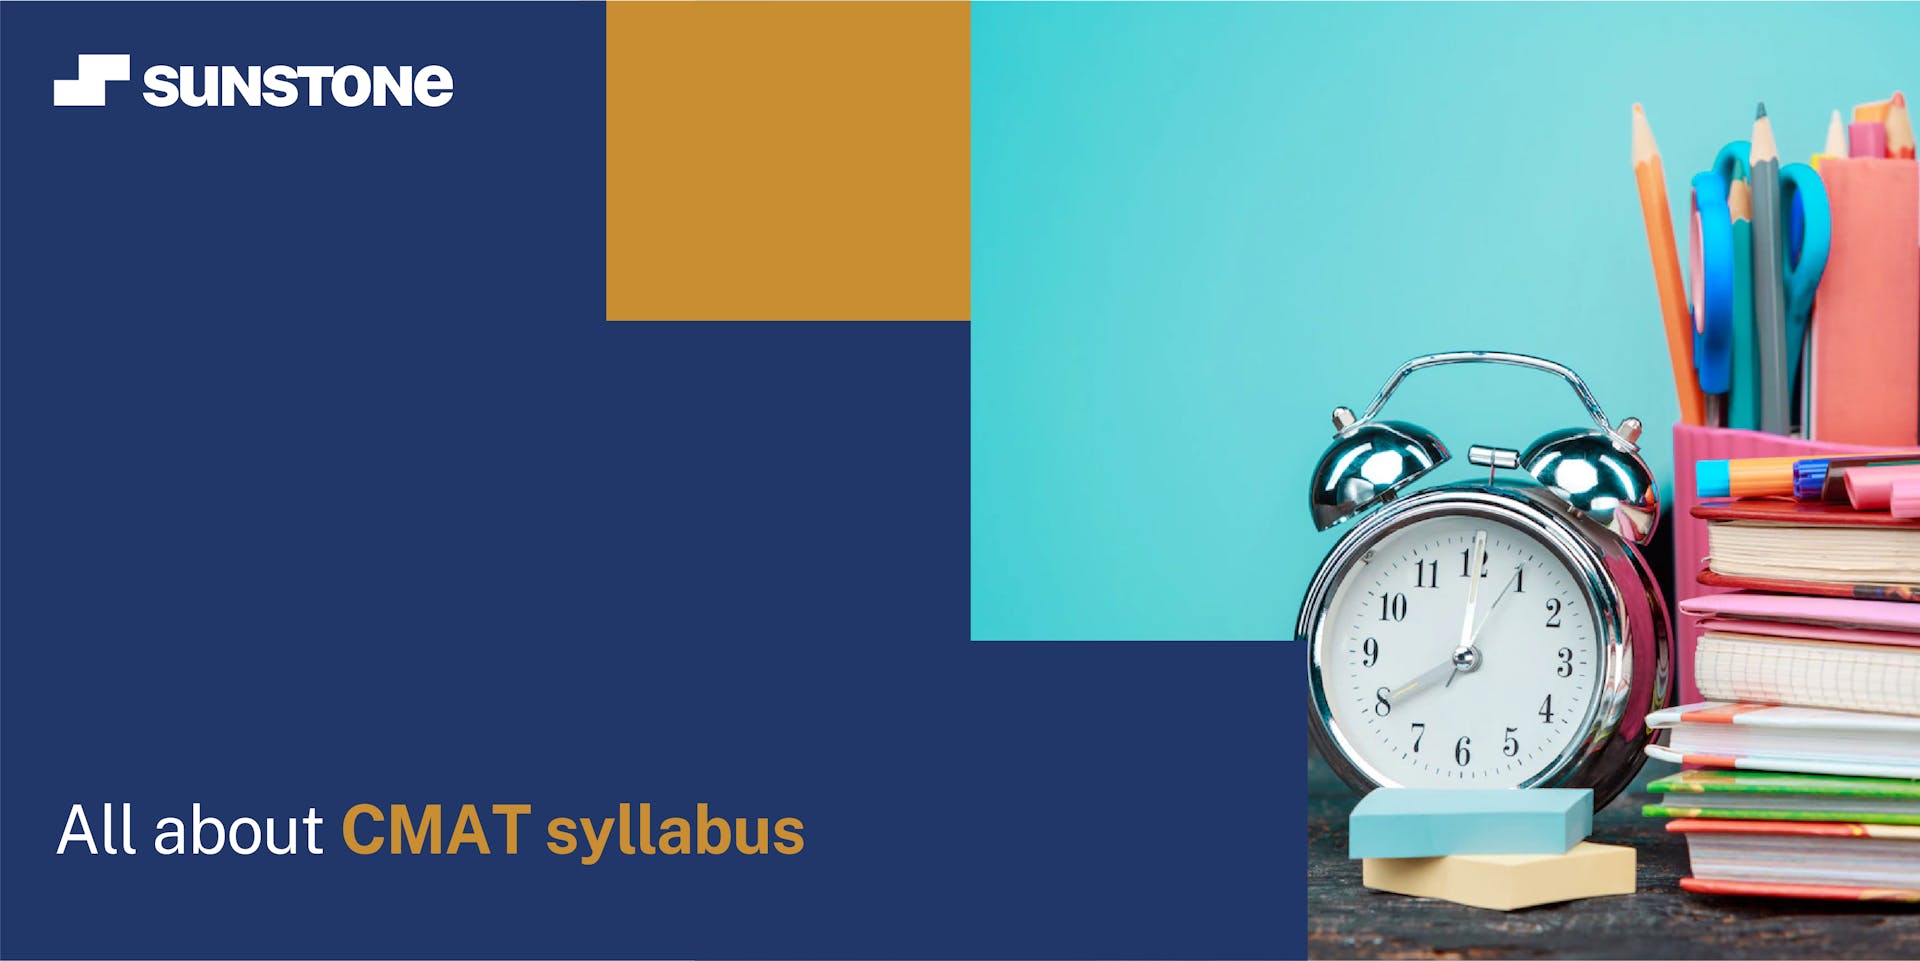 All about CMAT syllabus